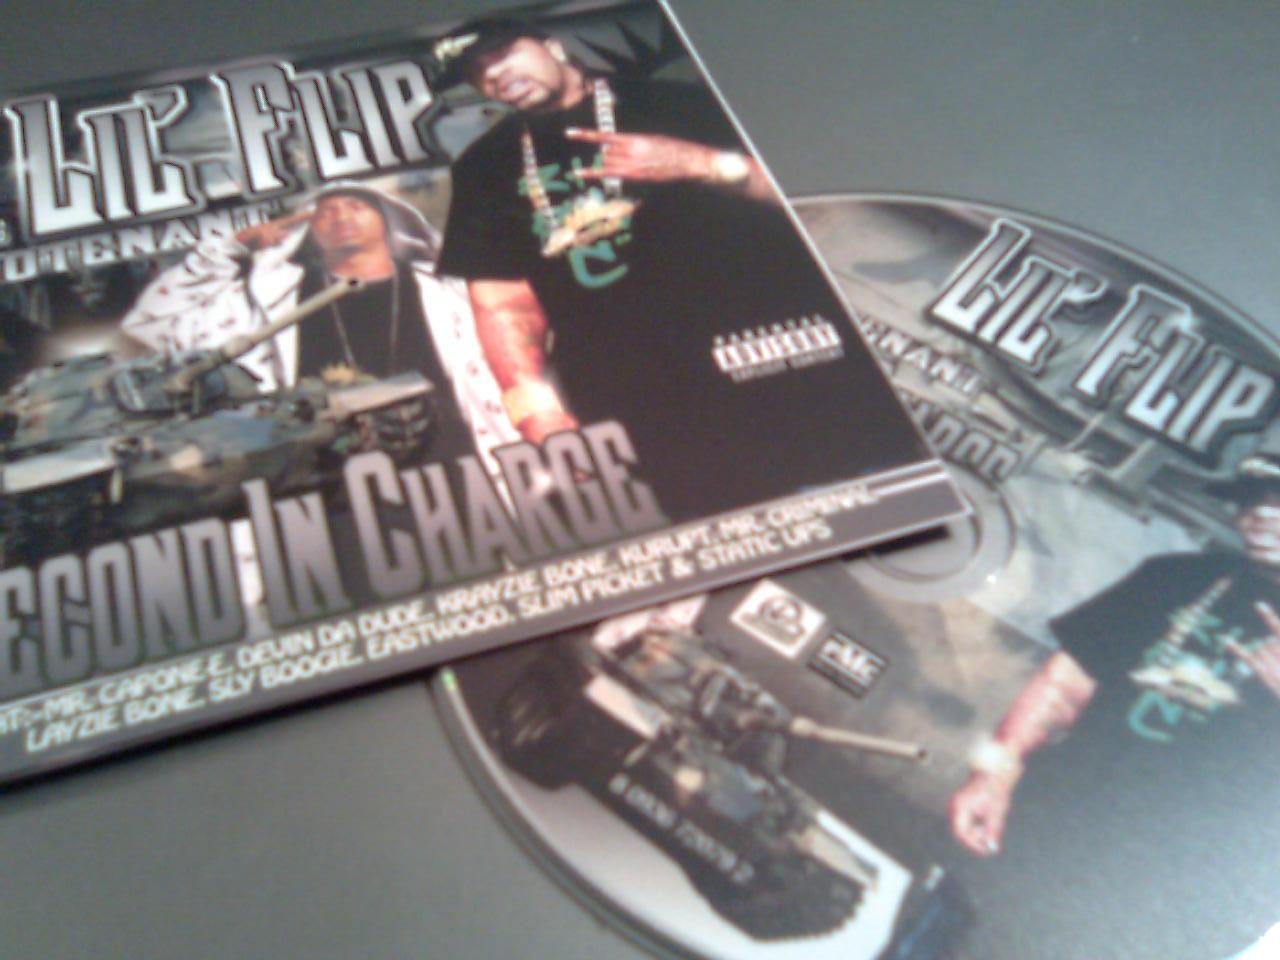 [lil_flip_presents_lootenant-second_in_charge-2008-scan.jpg]